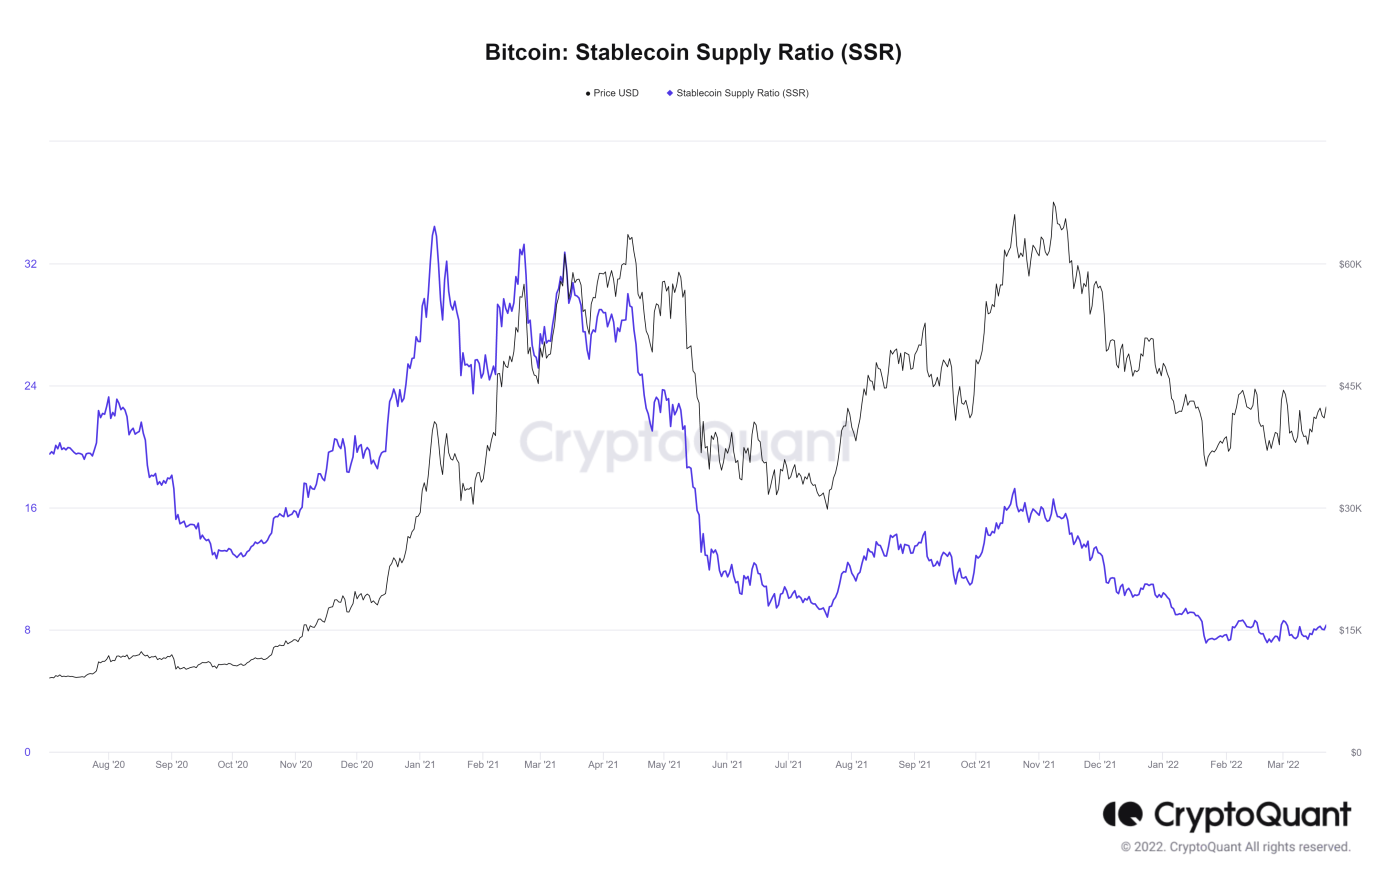 C:\Users\Łukasz\Downloads\Bitcoin Stablecoin Supply Ratio (SSR).png